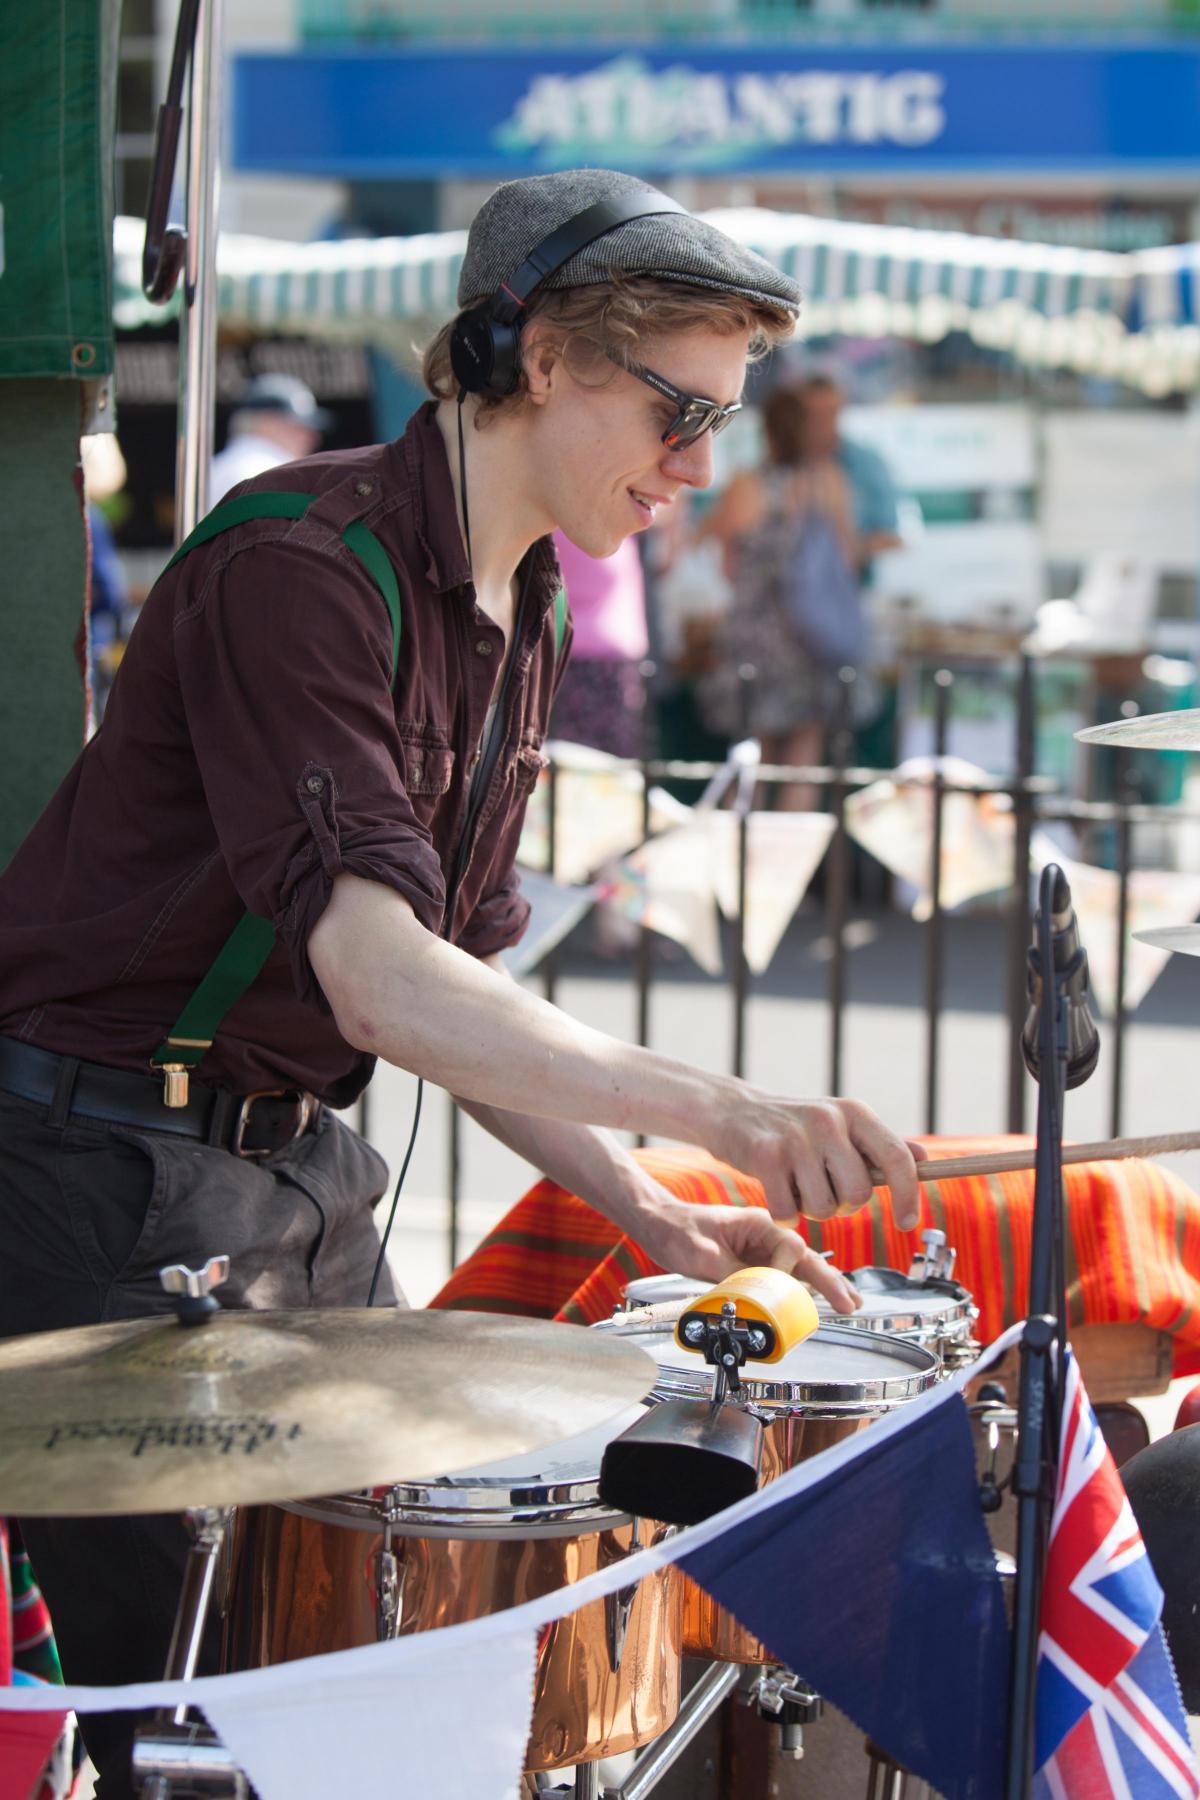 Southampton Vintage Festival. Weekend in Pictures 21/06/2014 - 23/06/2014.